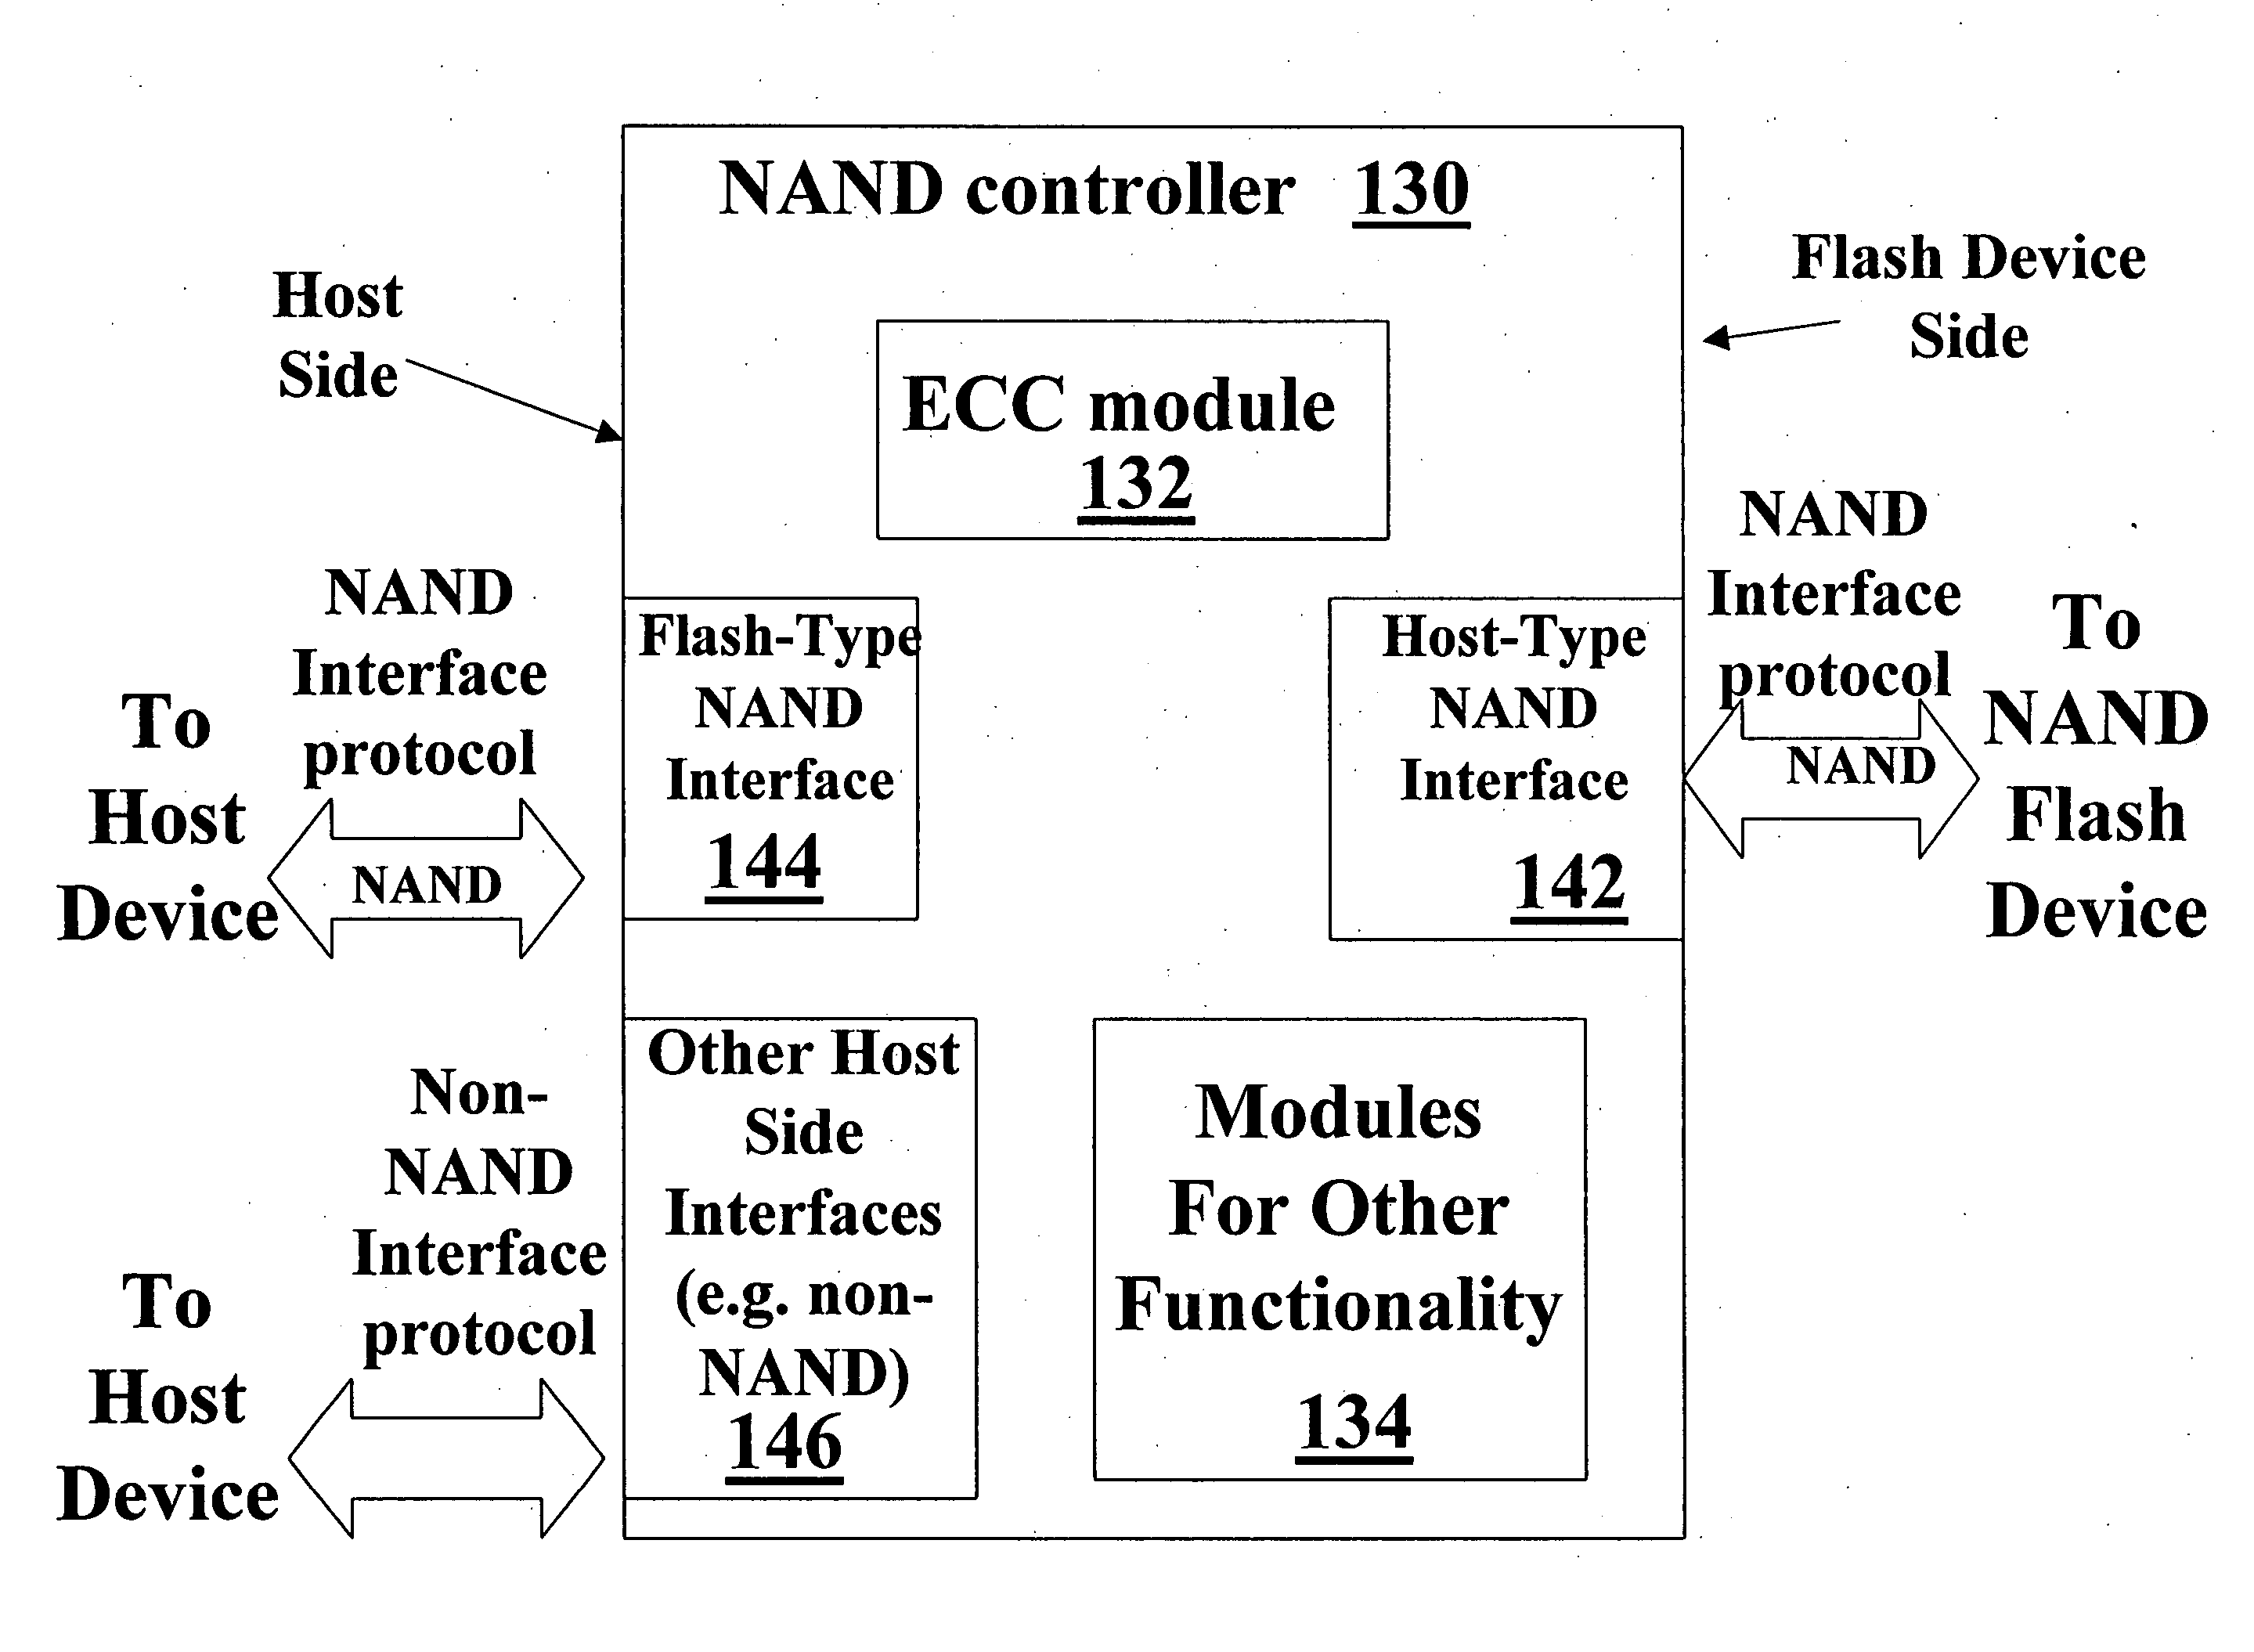 NAND flash memory controller exporting and NAND interface